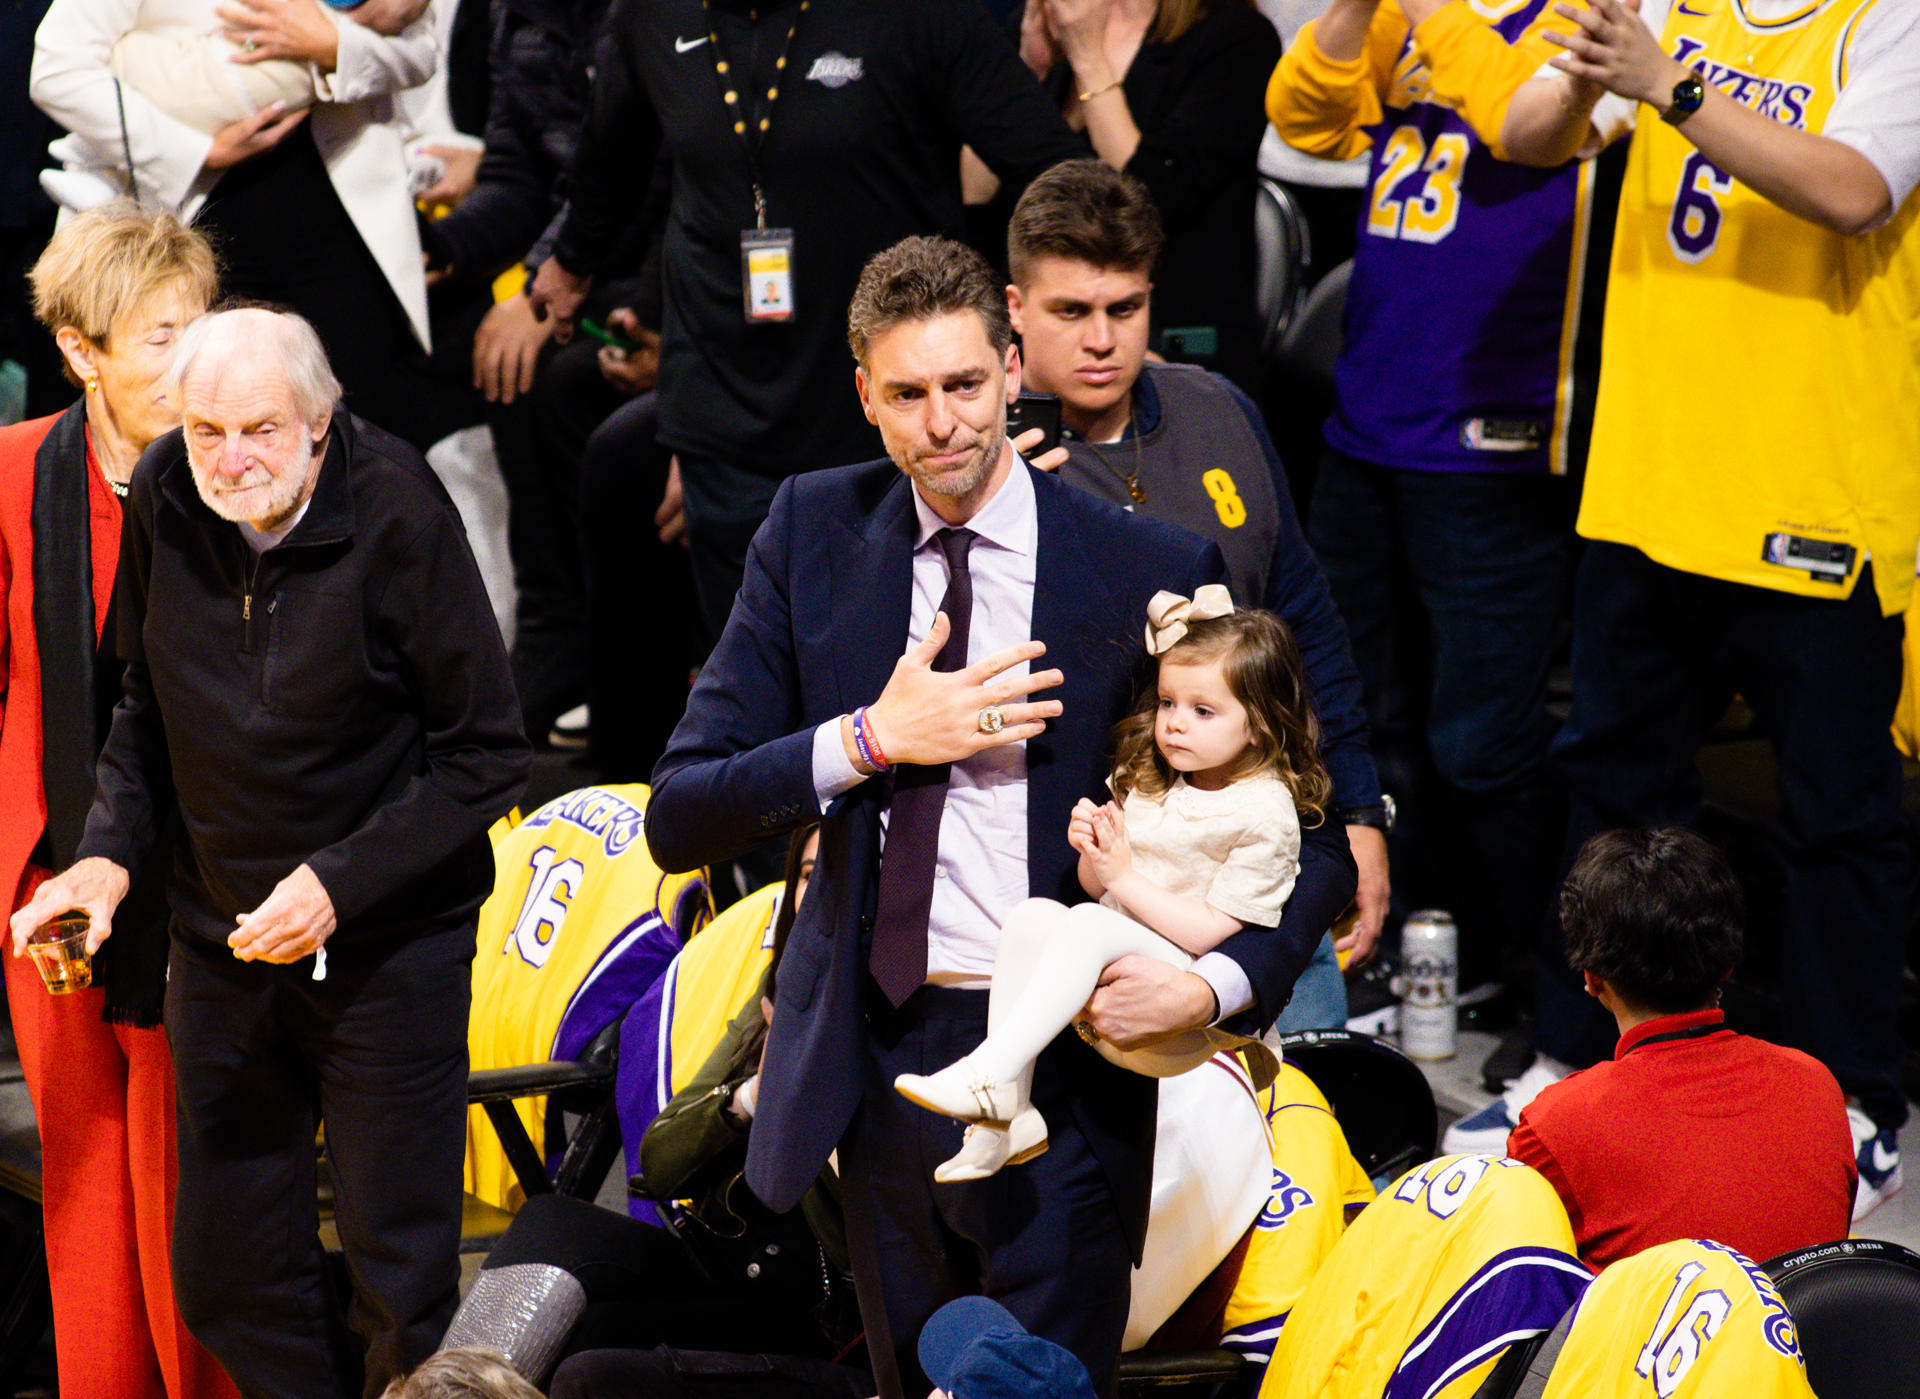 Spain's Pau Gasol (C), while holding his daughter, reacts at his retirement ceremony, during the NBA game between the Los Angeles Lakers and Memphis Grizzlies at Crypto.Com Arena in Los Angeles, CA, USA, 7 March 2023. EFE/ Phillip Kim